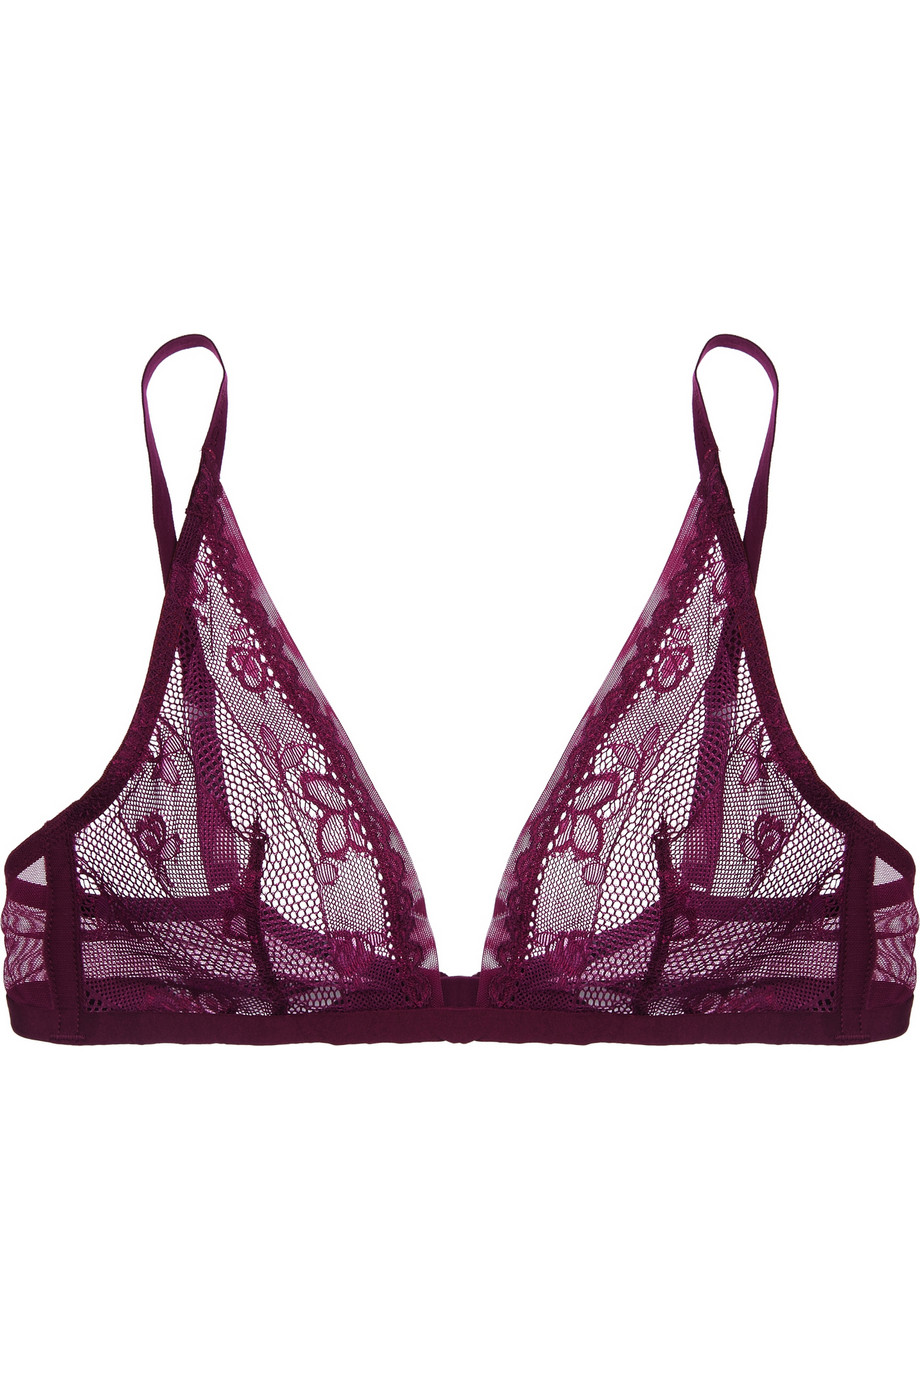 Calvin Klein Lace and Mesh Triangle Bra in Purple (cherry) | Lyst